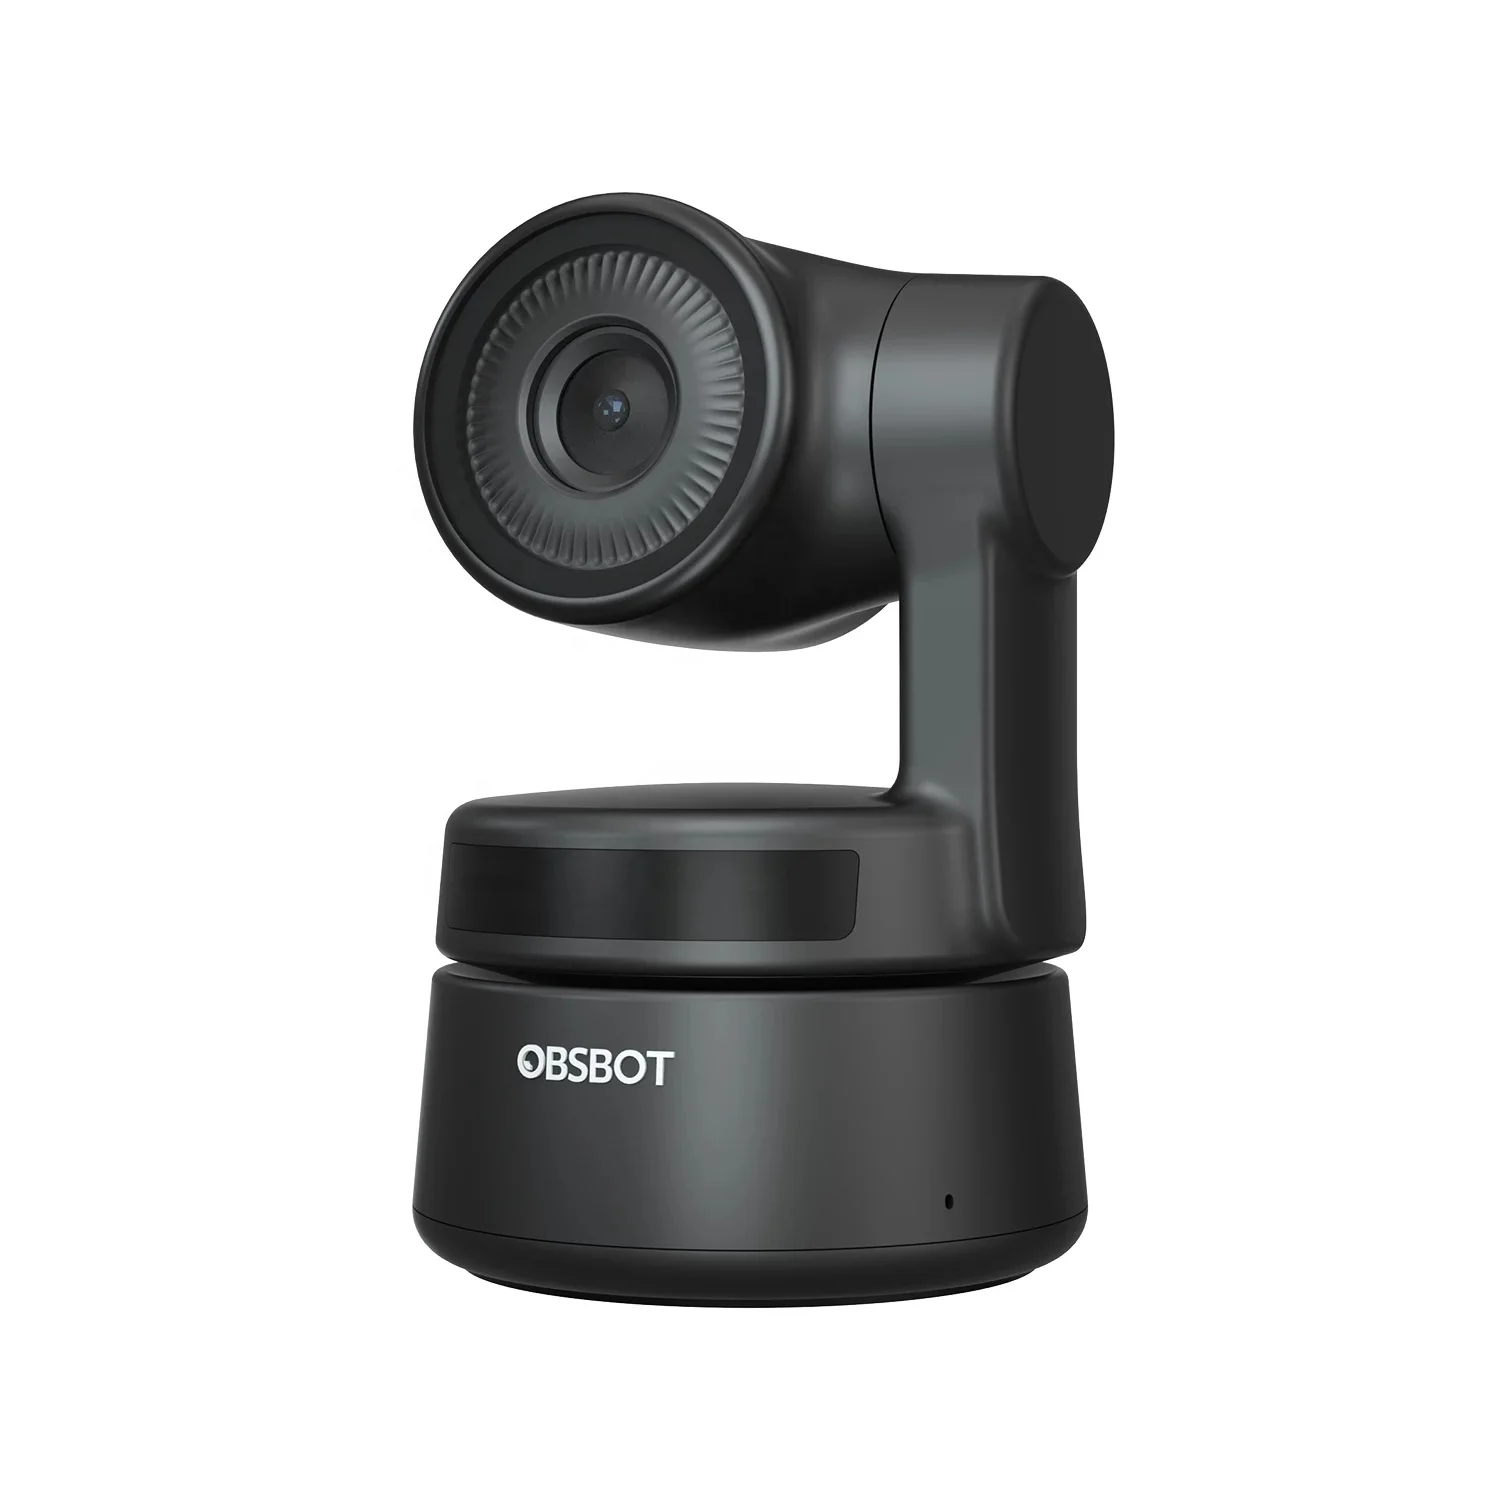 

Original OBSBOT Tiny 2-Axis Gimbal Camera AI-Powered PTZ Full HD 1080P Webcam Gesture Control Zoom Tracking Live Streaming